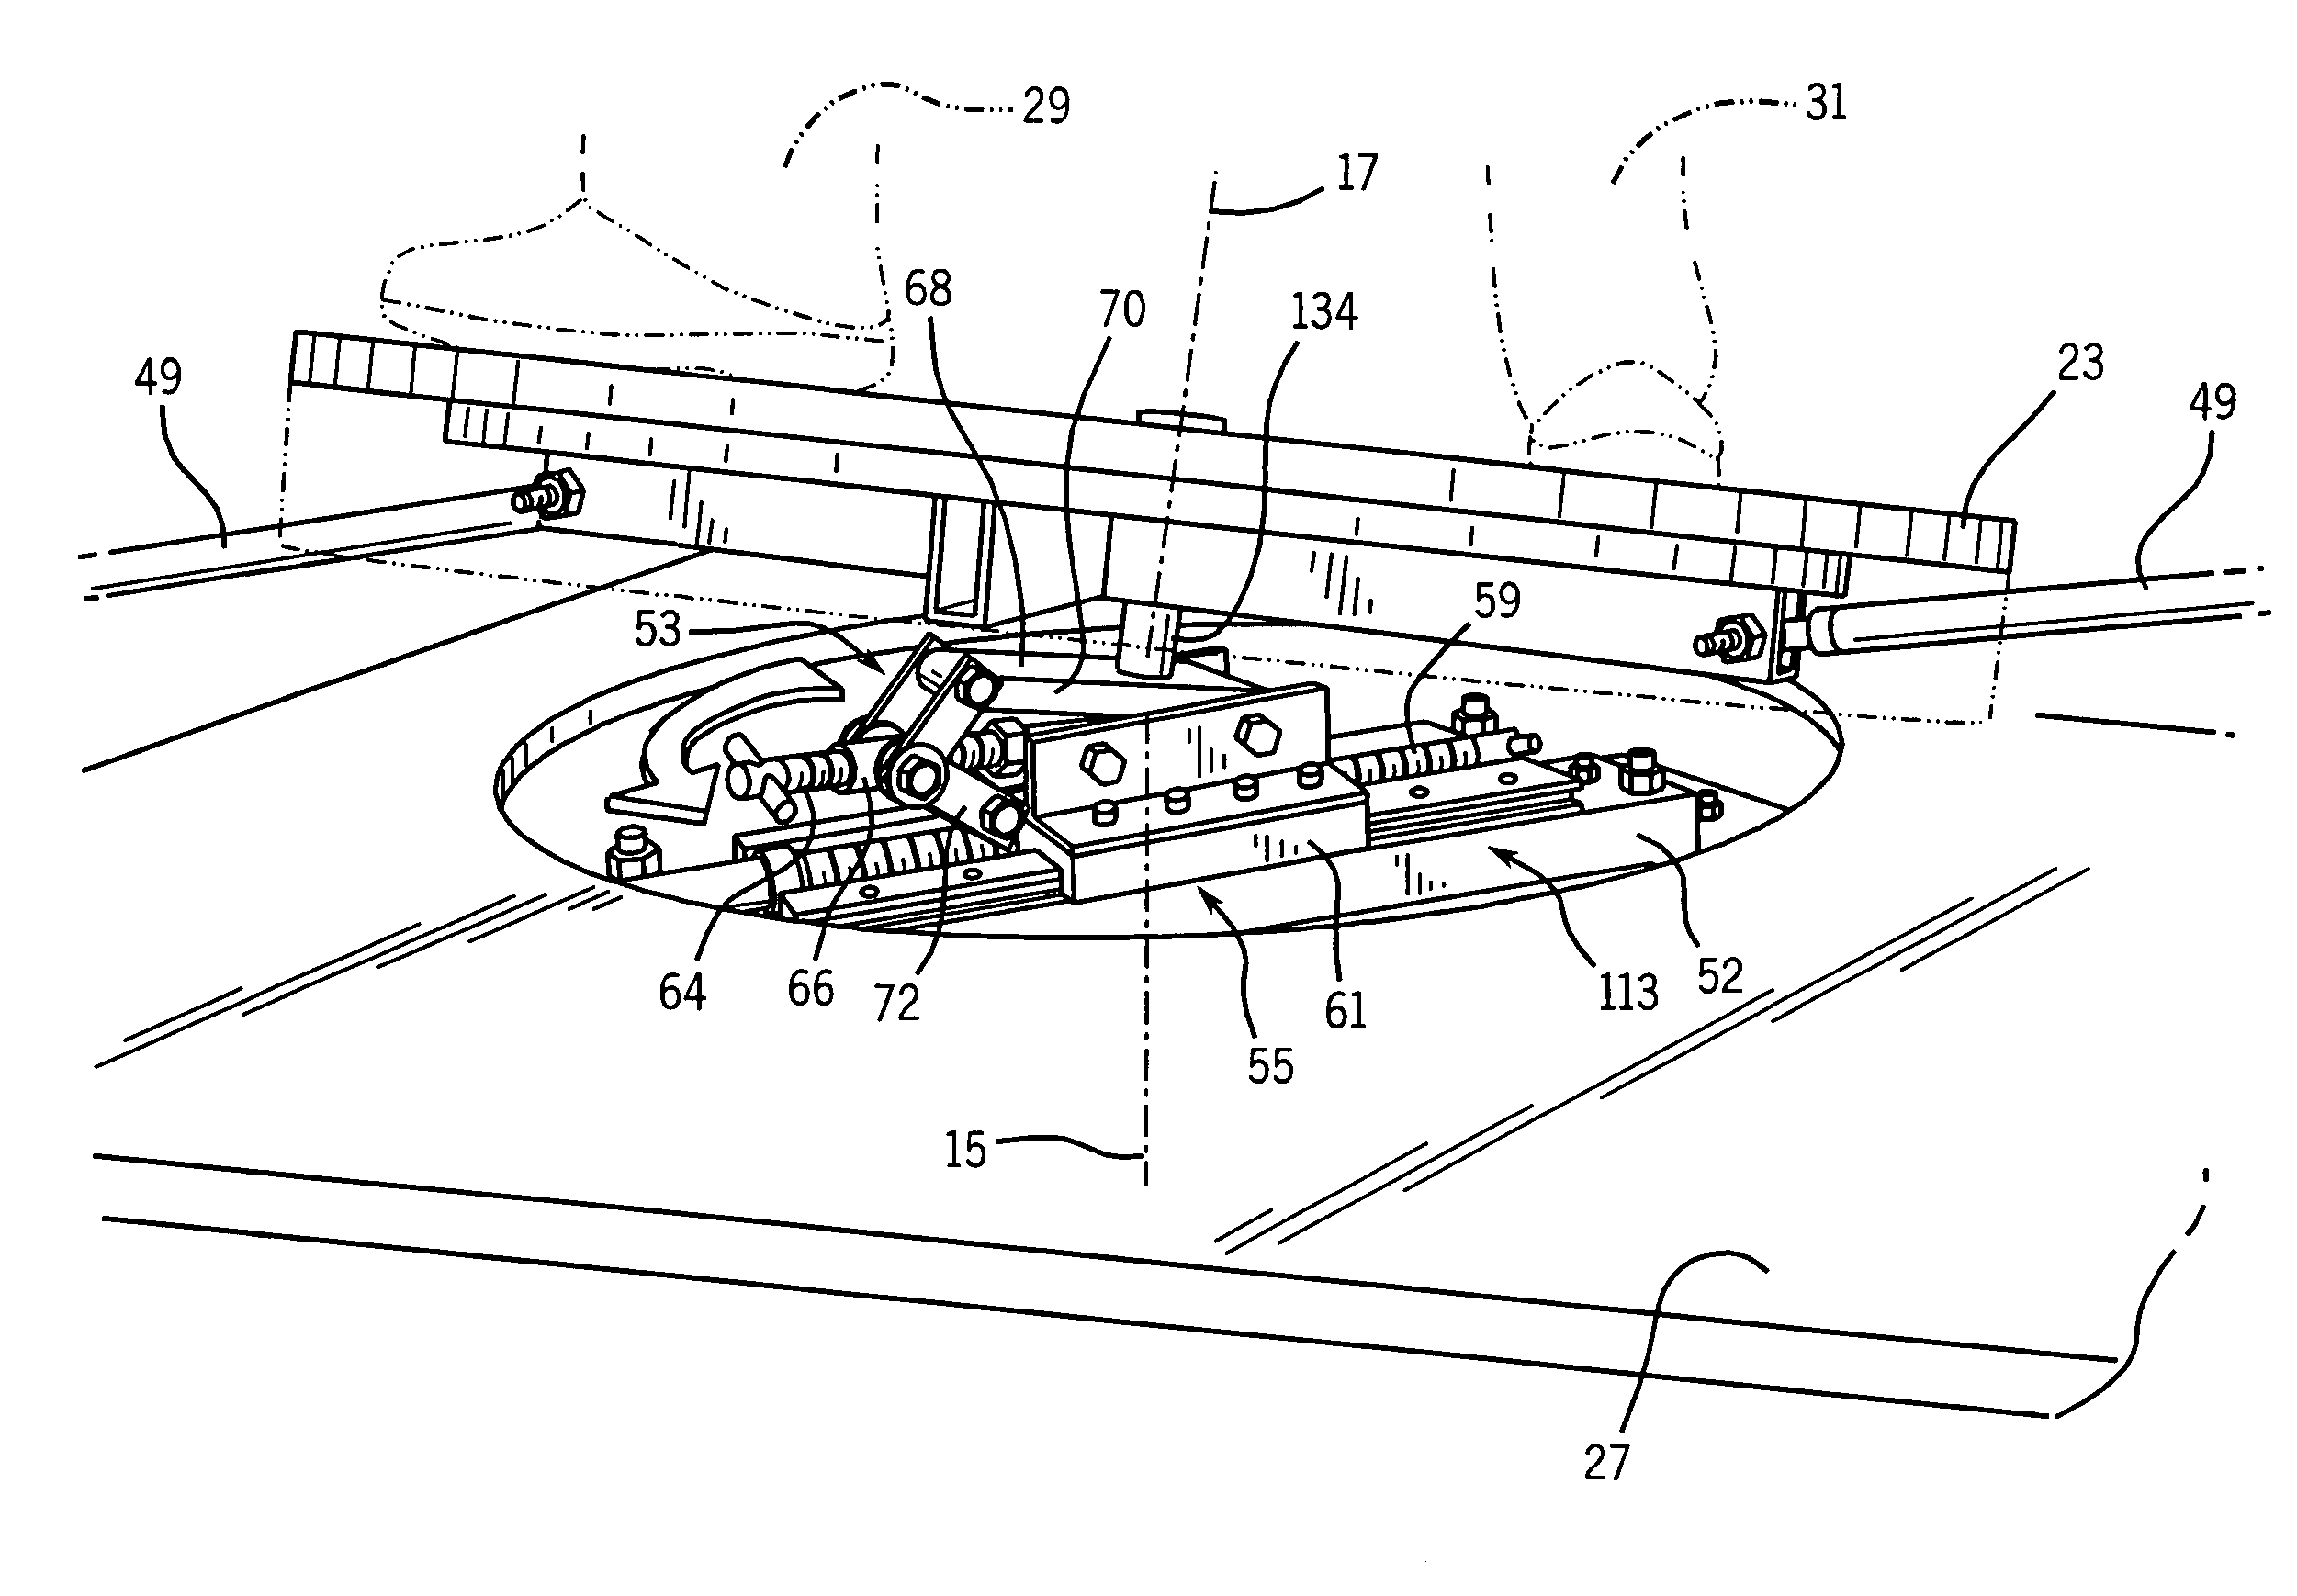 Exercise device having a movable platform